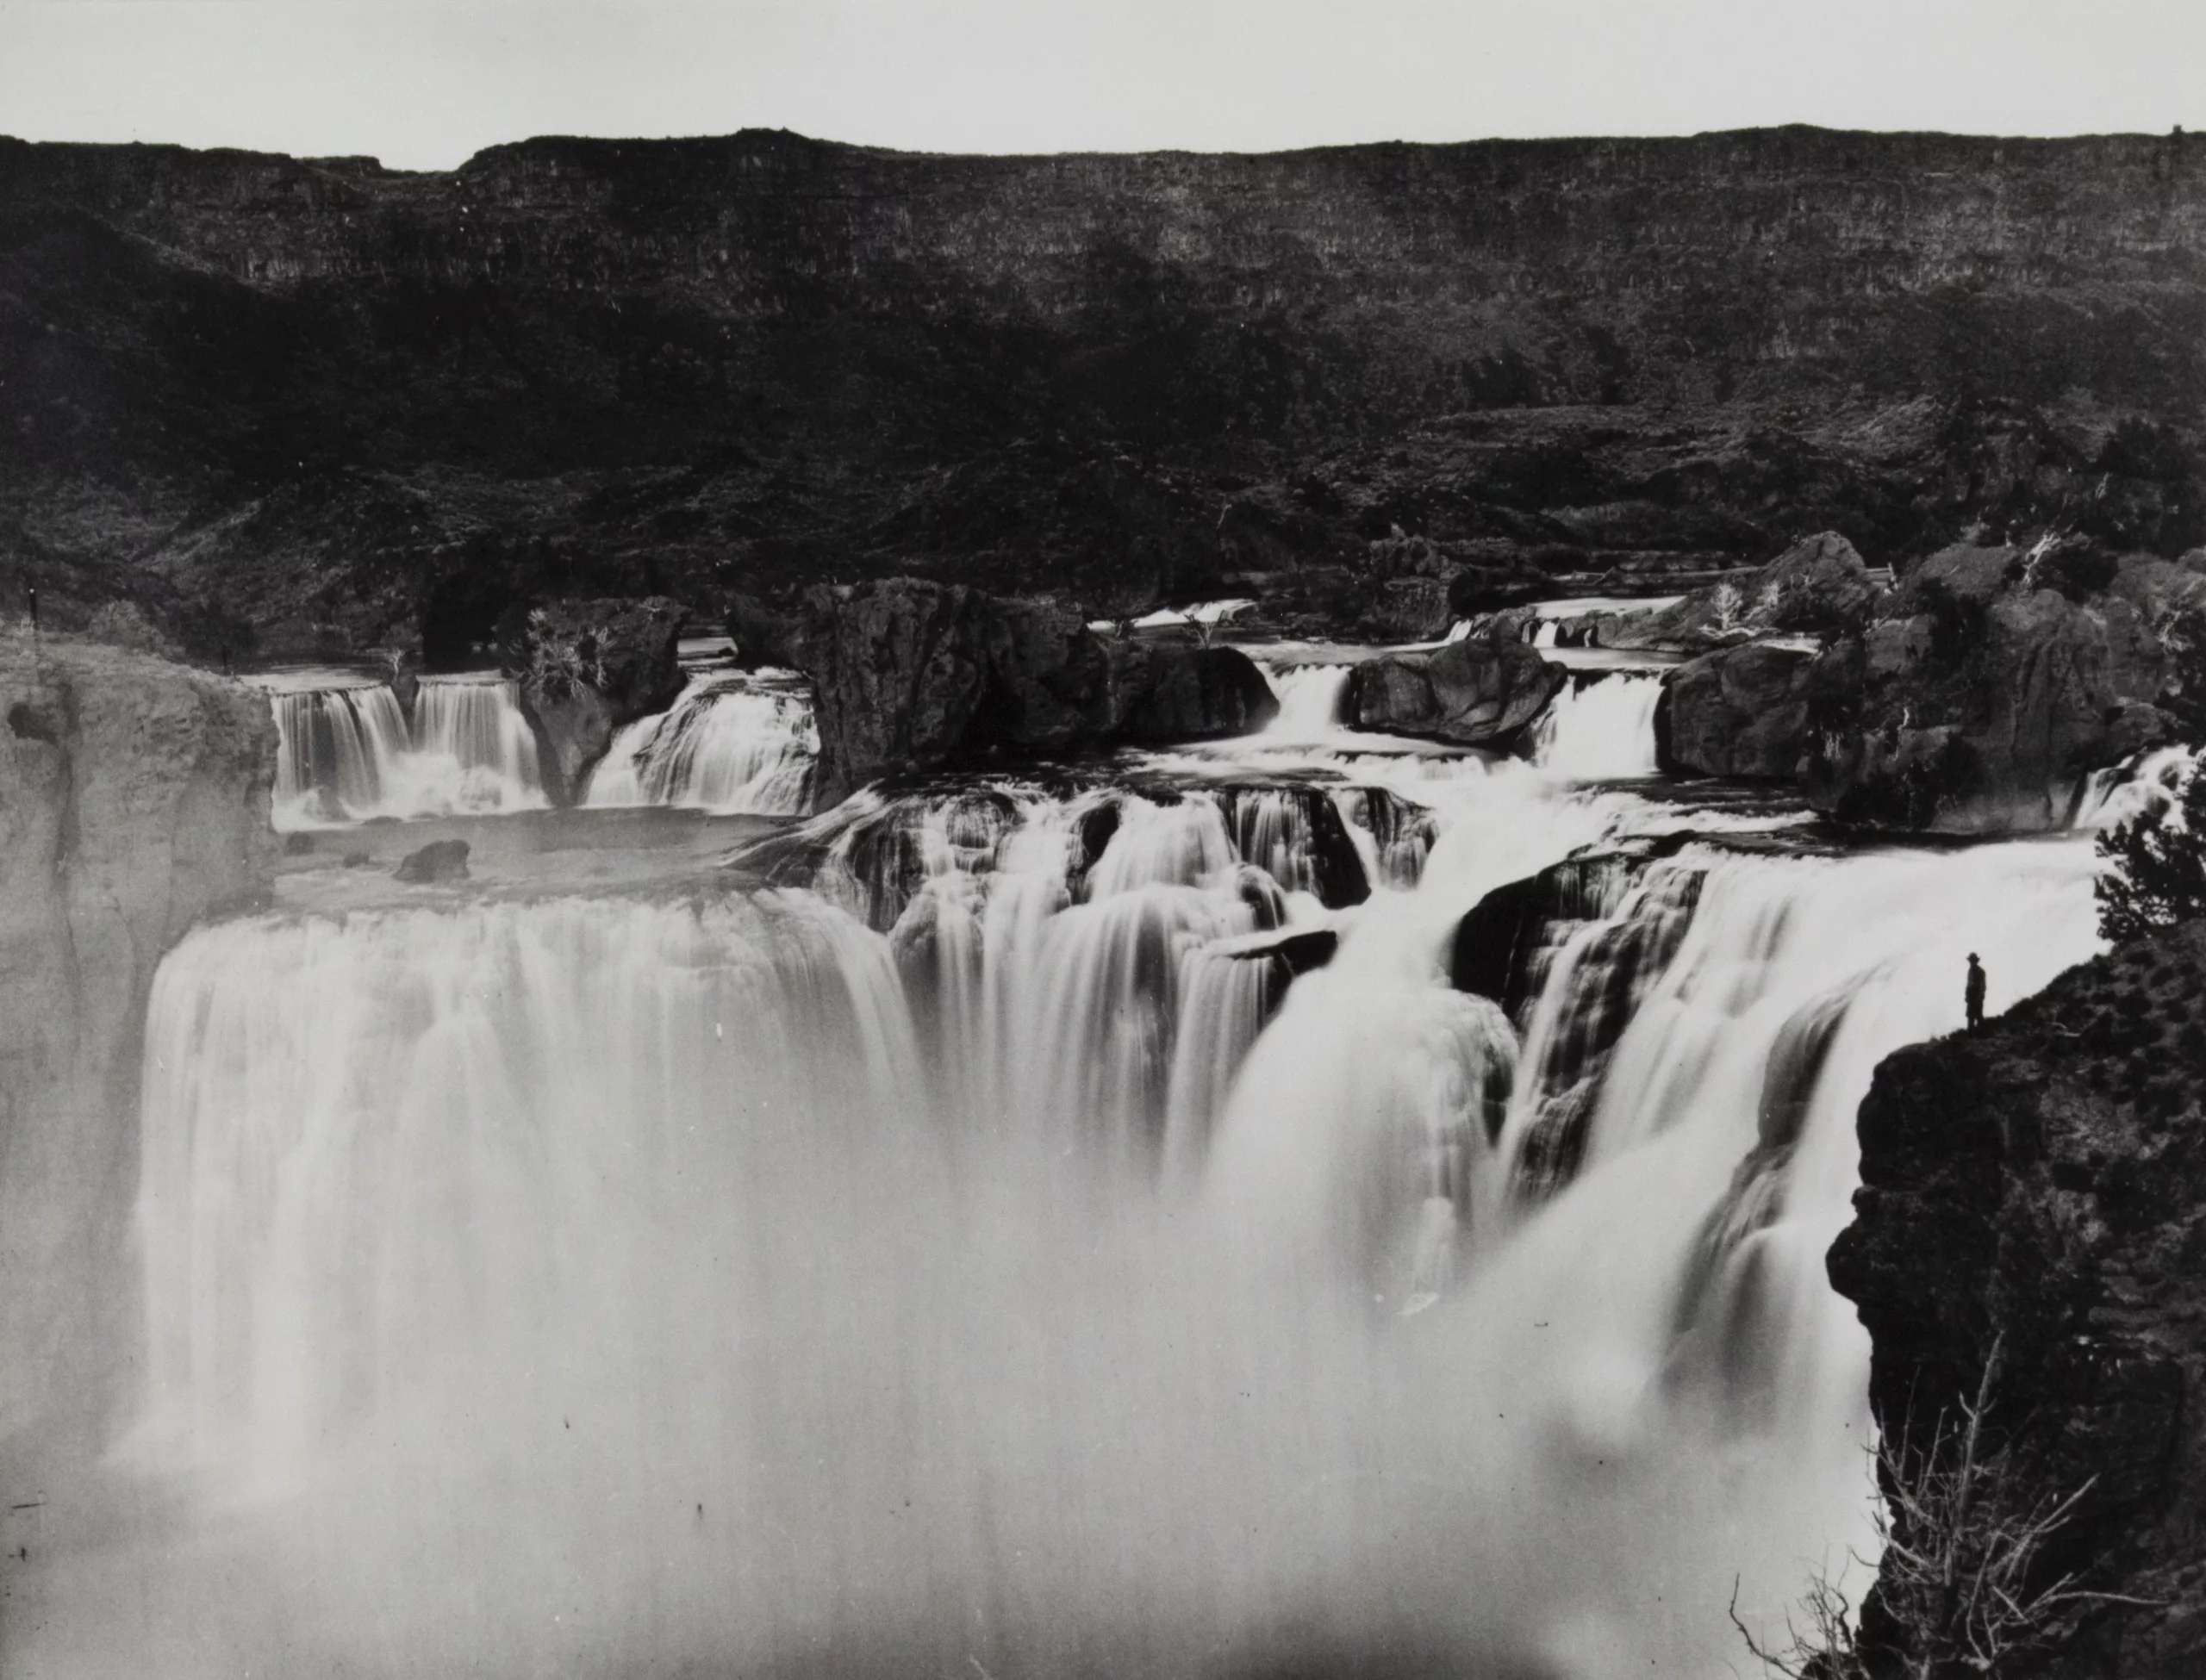 Black and white photograph of a barren landscape, with a stepped waterfall in the center foreground.